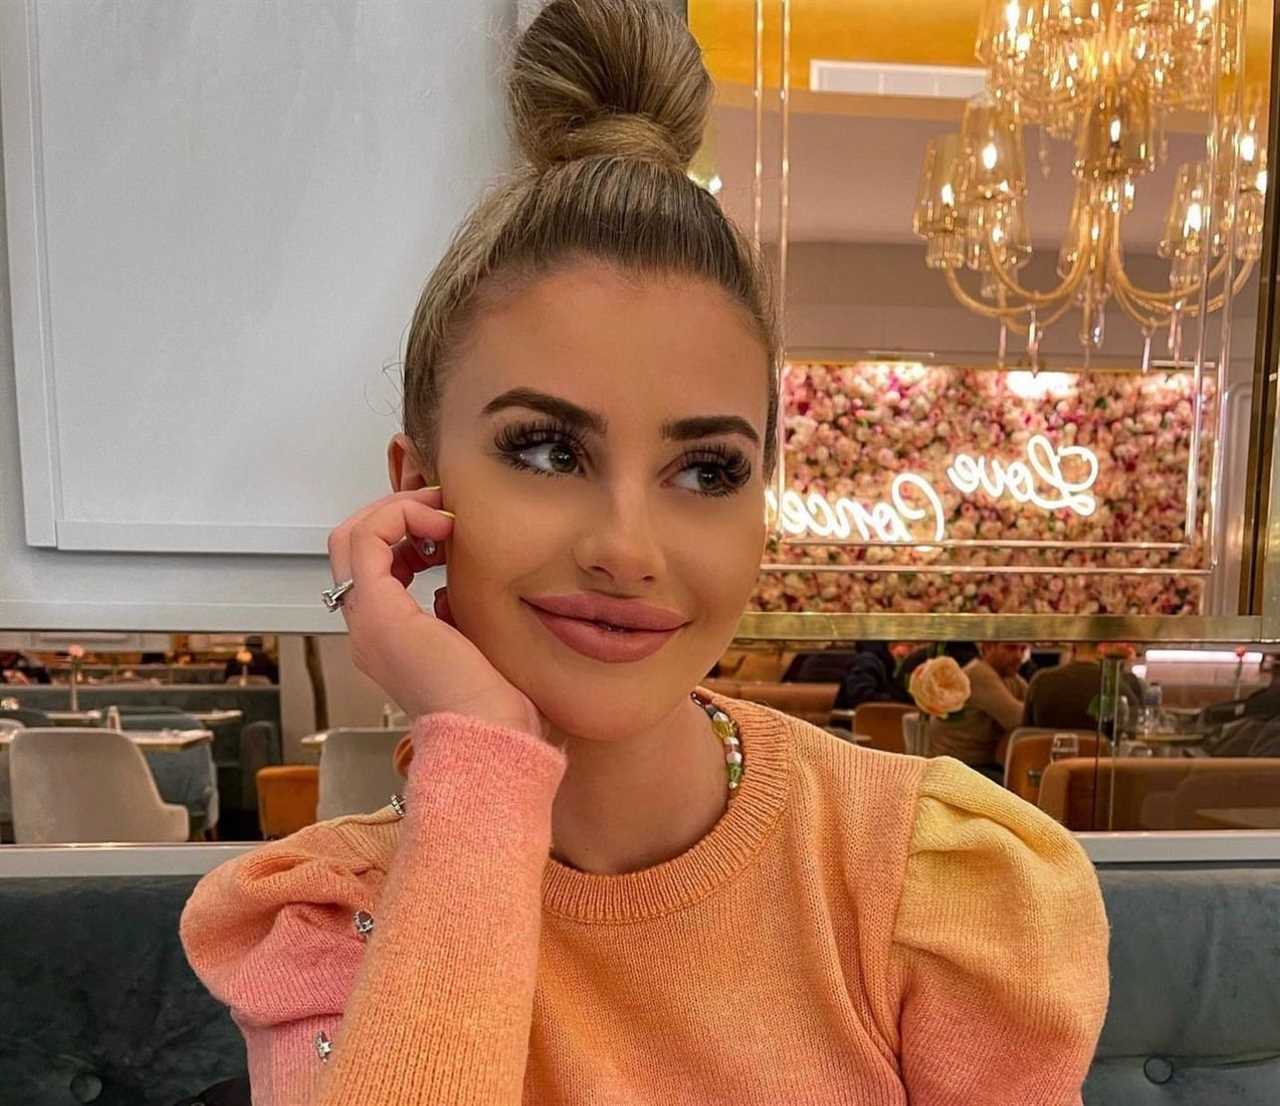 BBC announces harrowing new crime drama based on true story of British model Chloe Ayling kidnapped in Italy